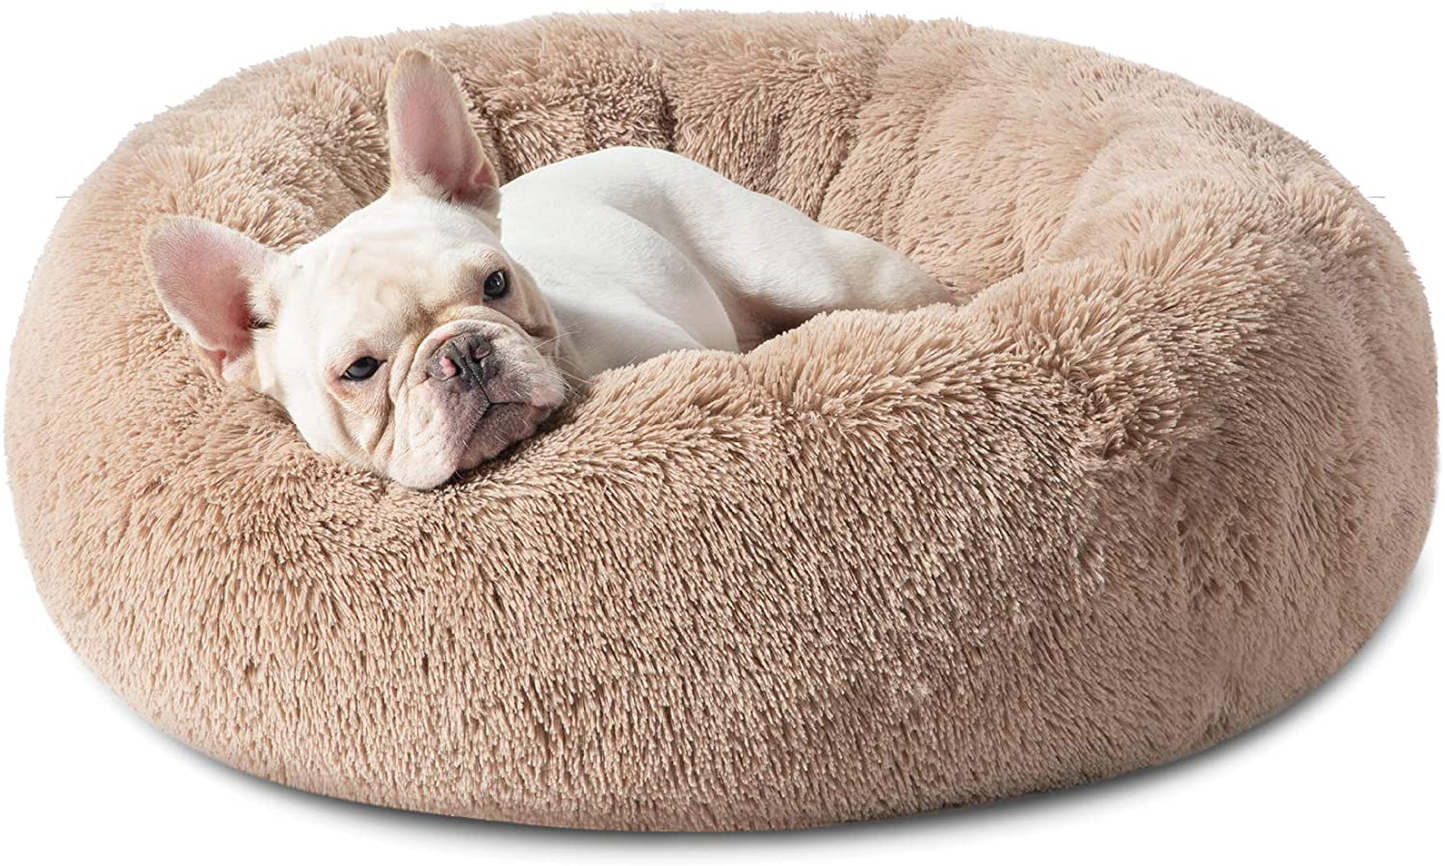 Bedsure Calming Dog Beds for Small Medium Large Dogs - round Donut Washable Dog Bed, Anti-Slip Faux Fur Fluffy Donut Cuddler Anxiety Cat Bed, Fits up to 15-100 Lbs